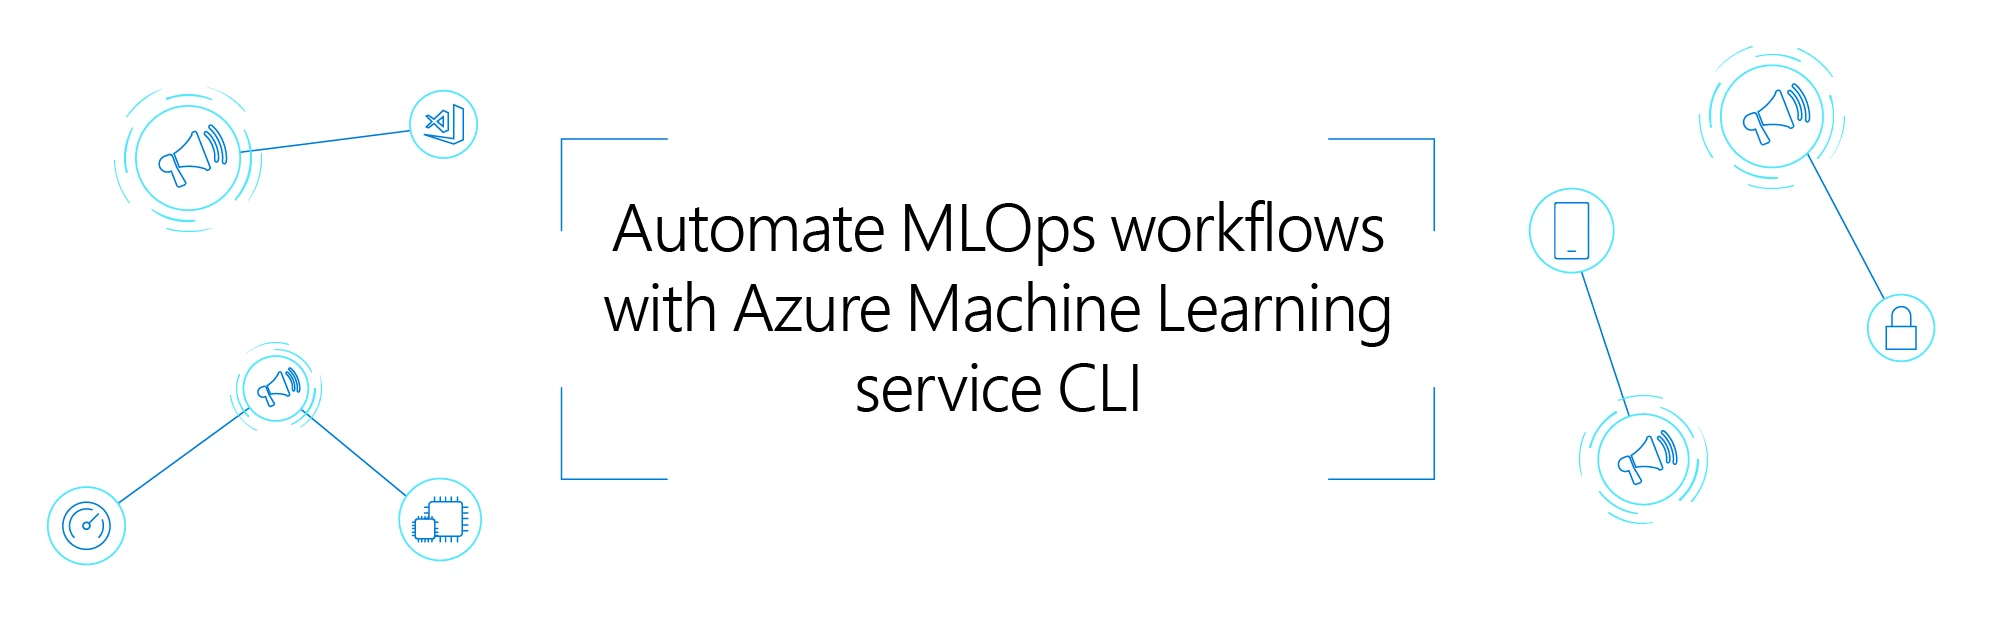 Image with reference to the title "Automate MLOps workflows with Azure Machine Learning service CLI"